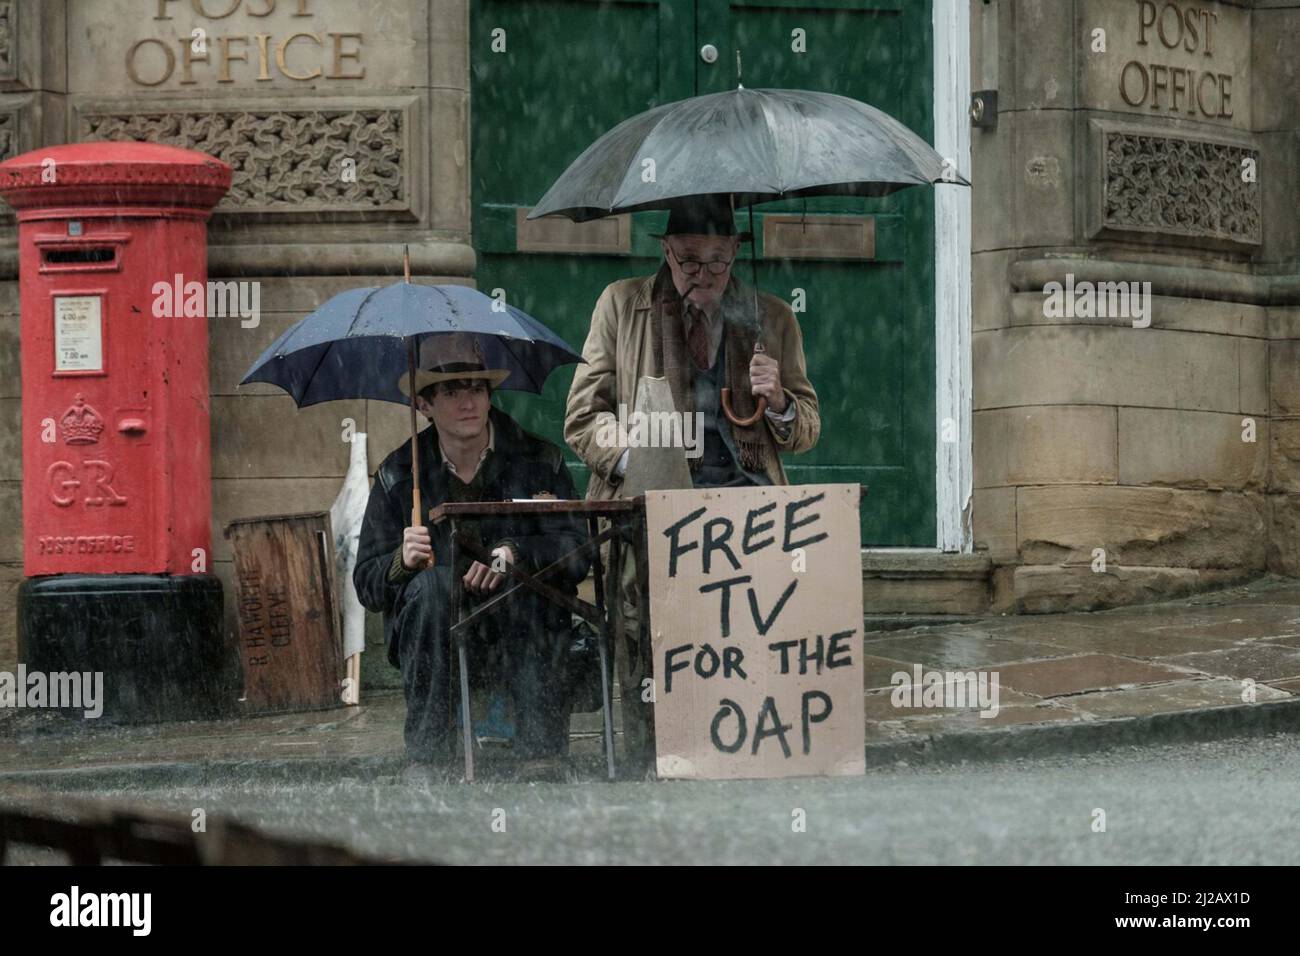 THE DUKE (2020) FIONN WHITEHEAD JIM BROADBENT ROGER MICHELL (DIR) SONY PICTURES CLASSICS/MOVIESTORE COLLECTION Foto Stock